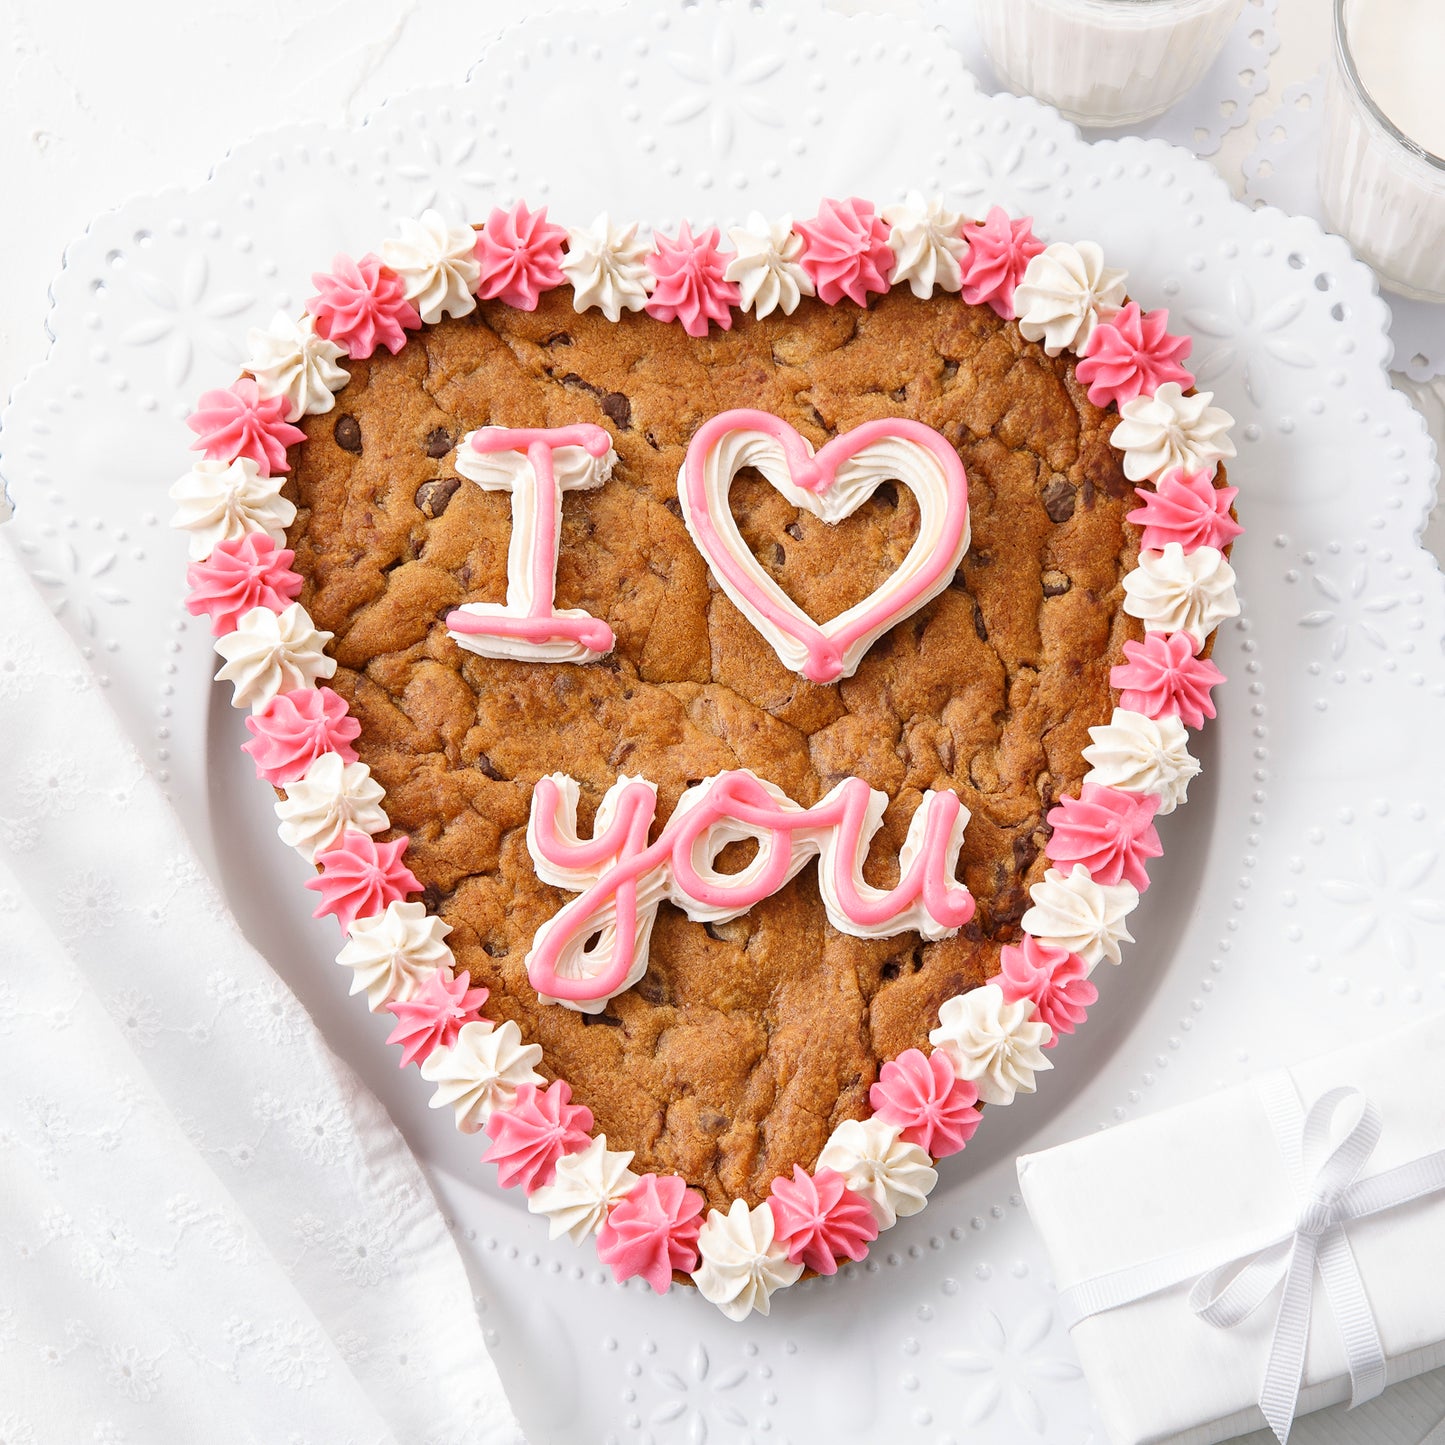 A heart-shaped cookie cake with an I Love You sentiment and decorated with pink and white frosting